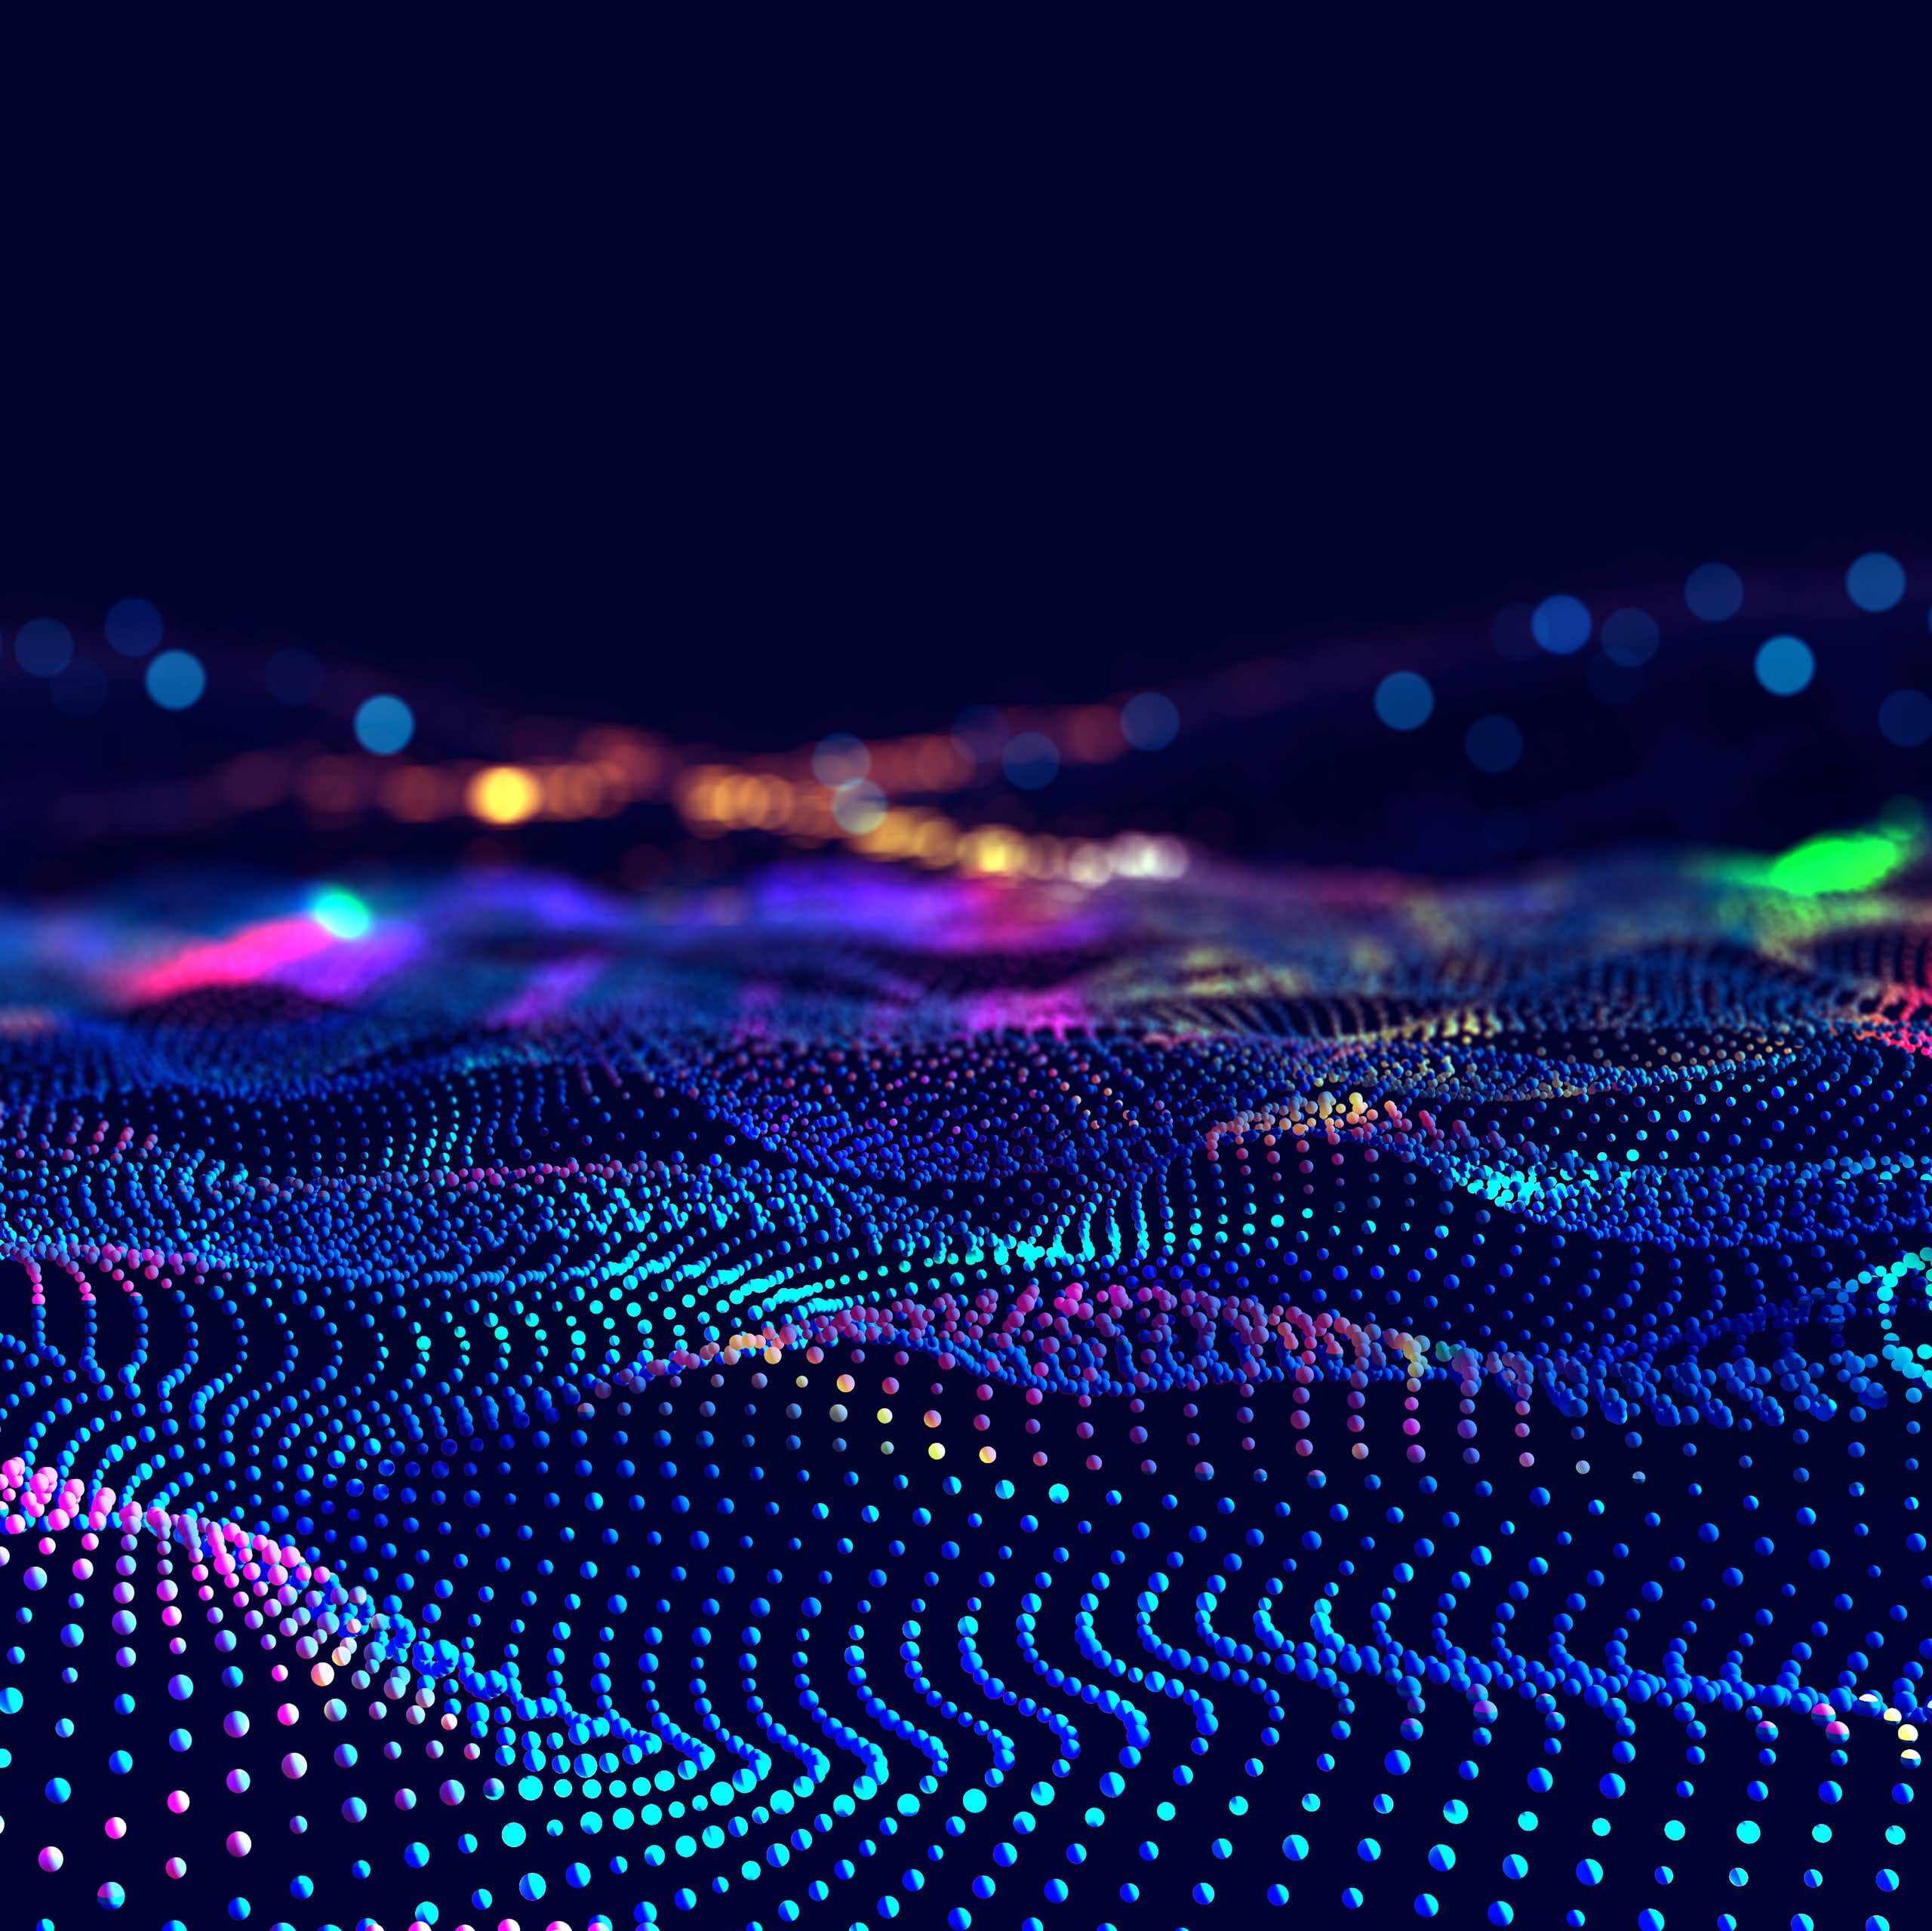 Abstract image of waves of coloured dots against a black background.